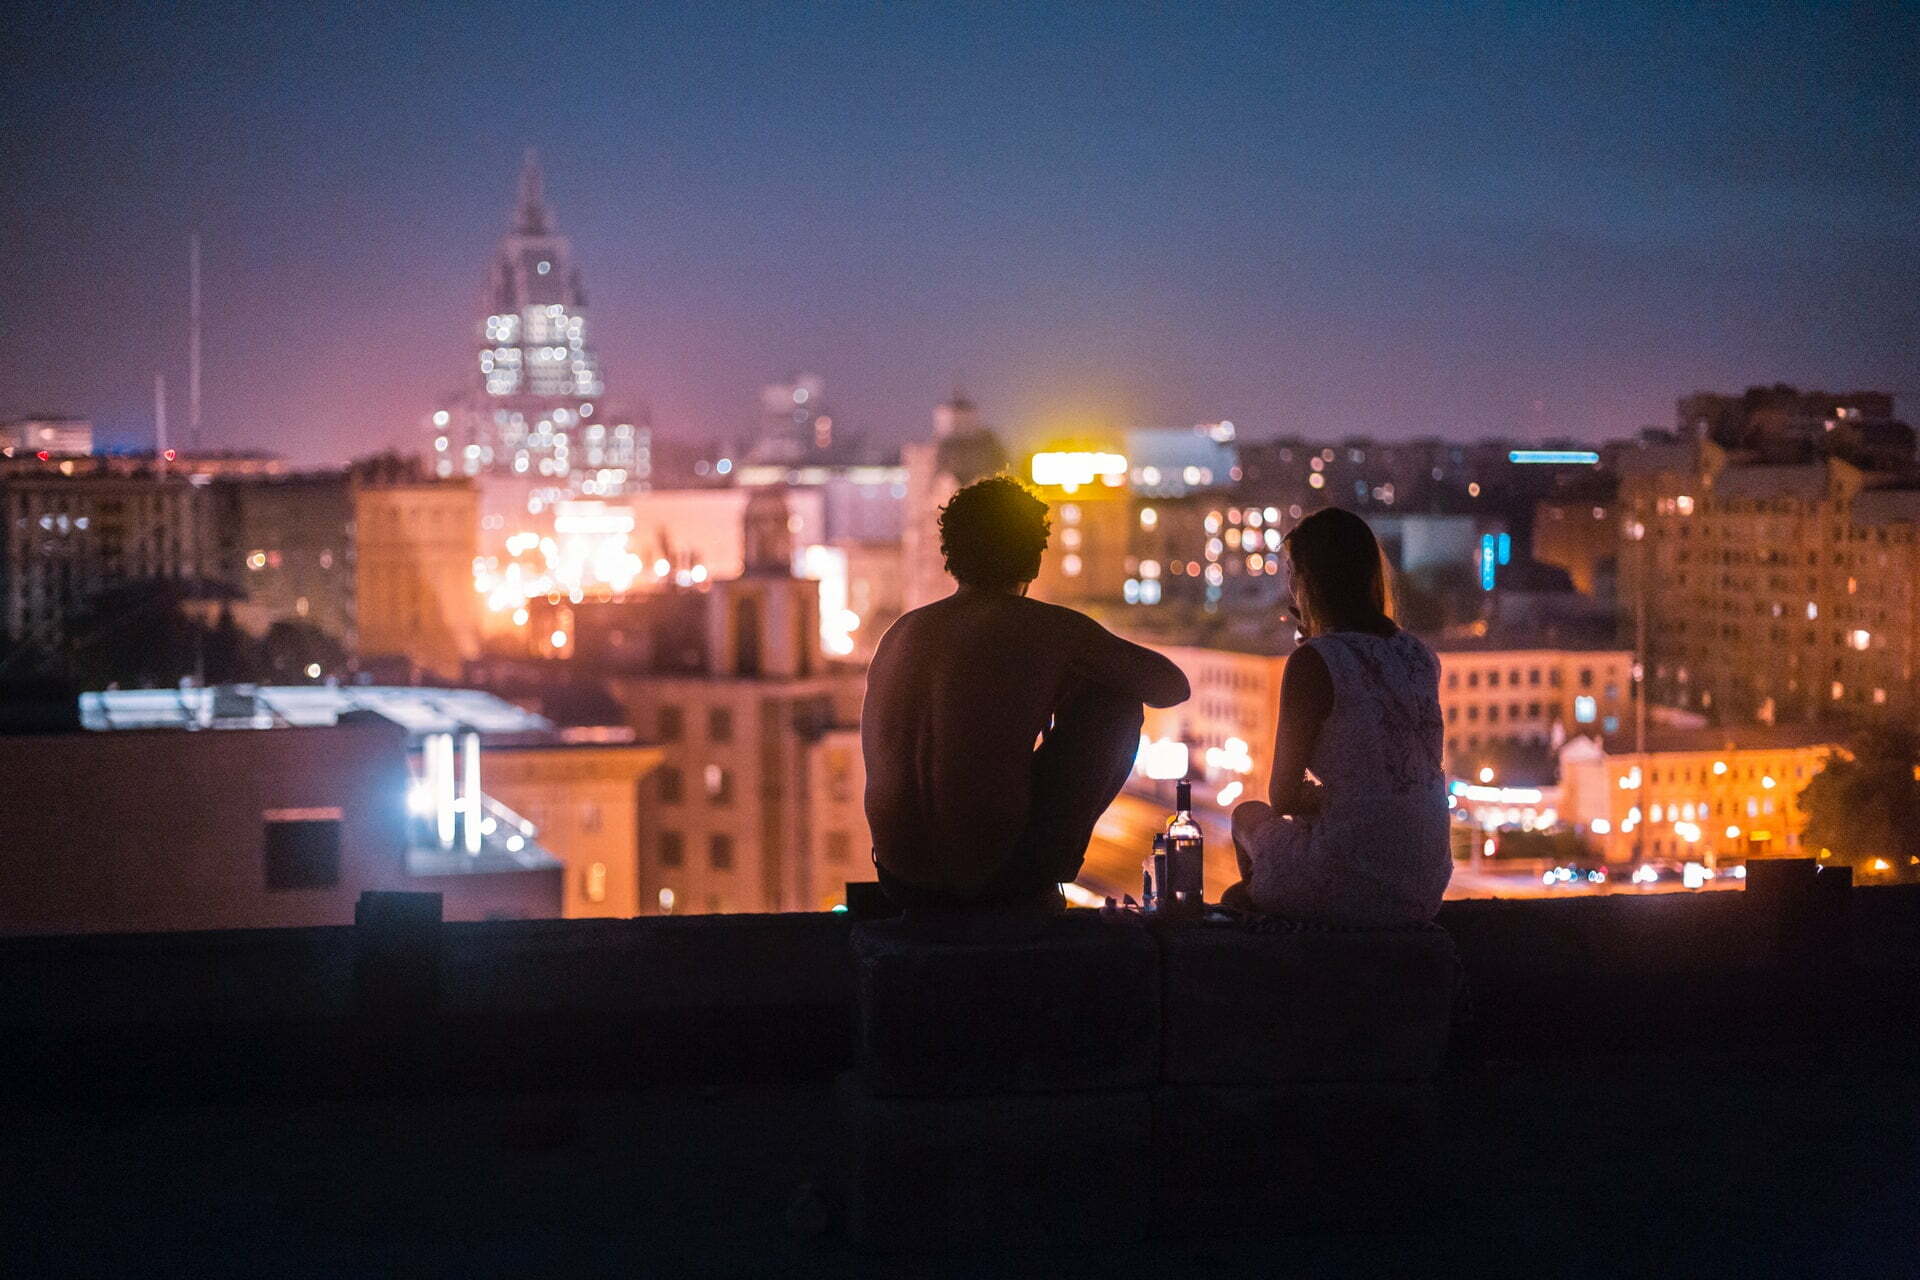 a couple sitting on a ledge overlooking a city at night